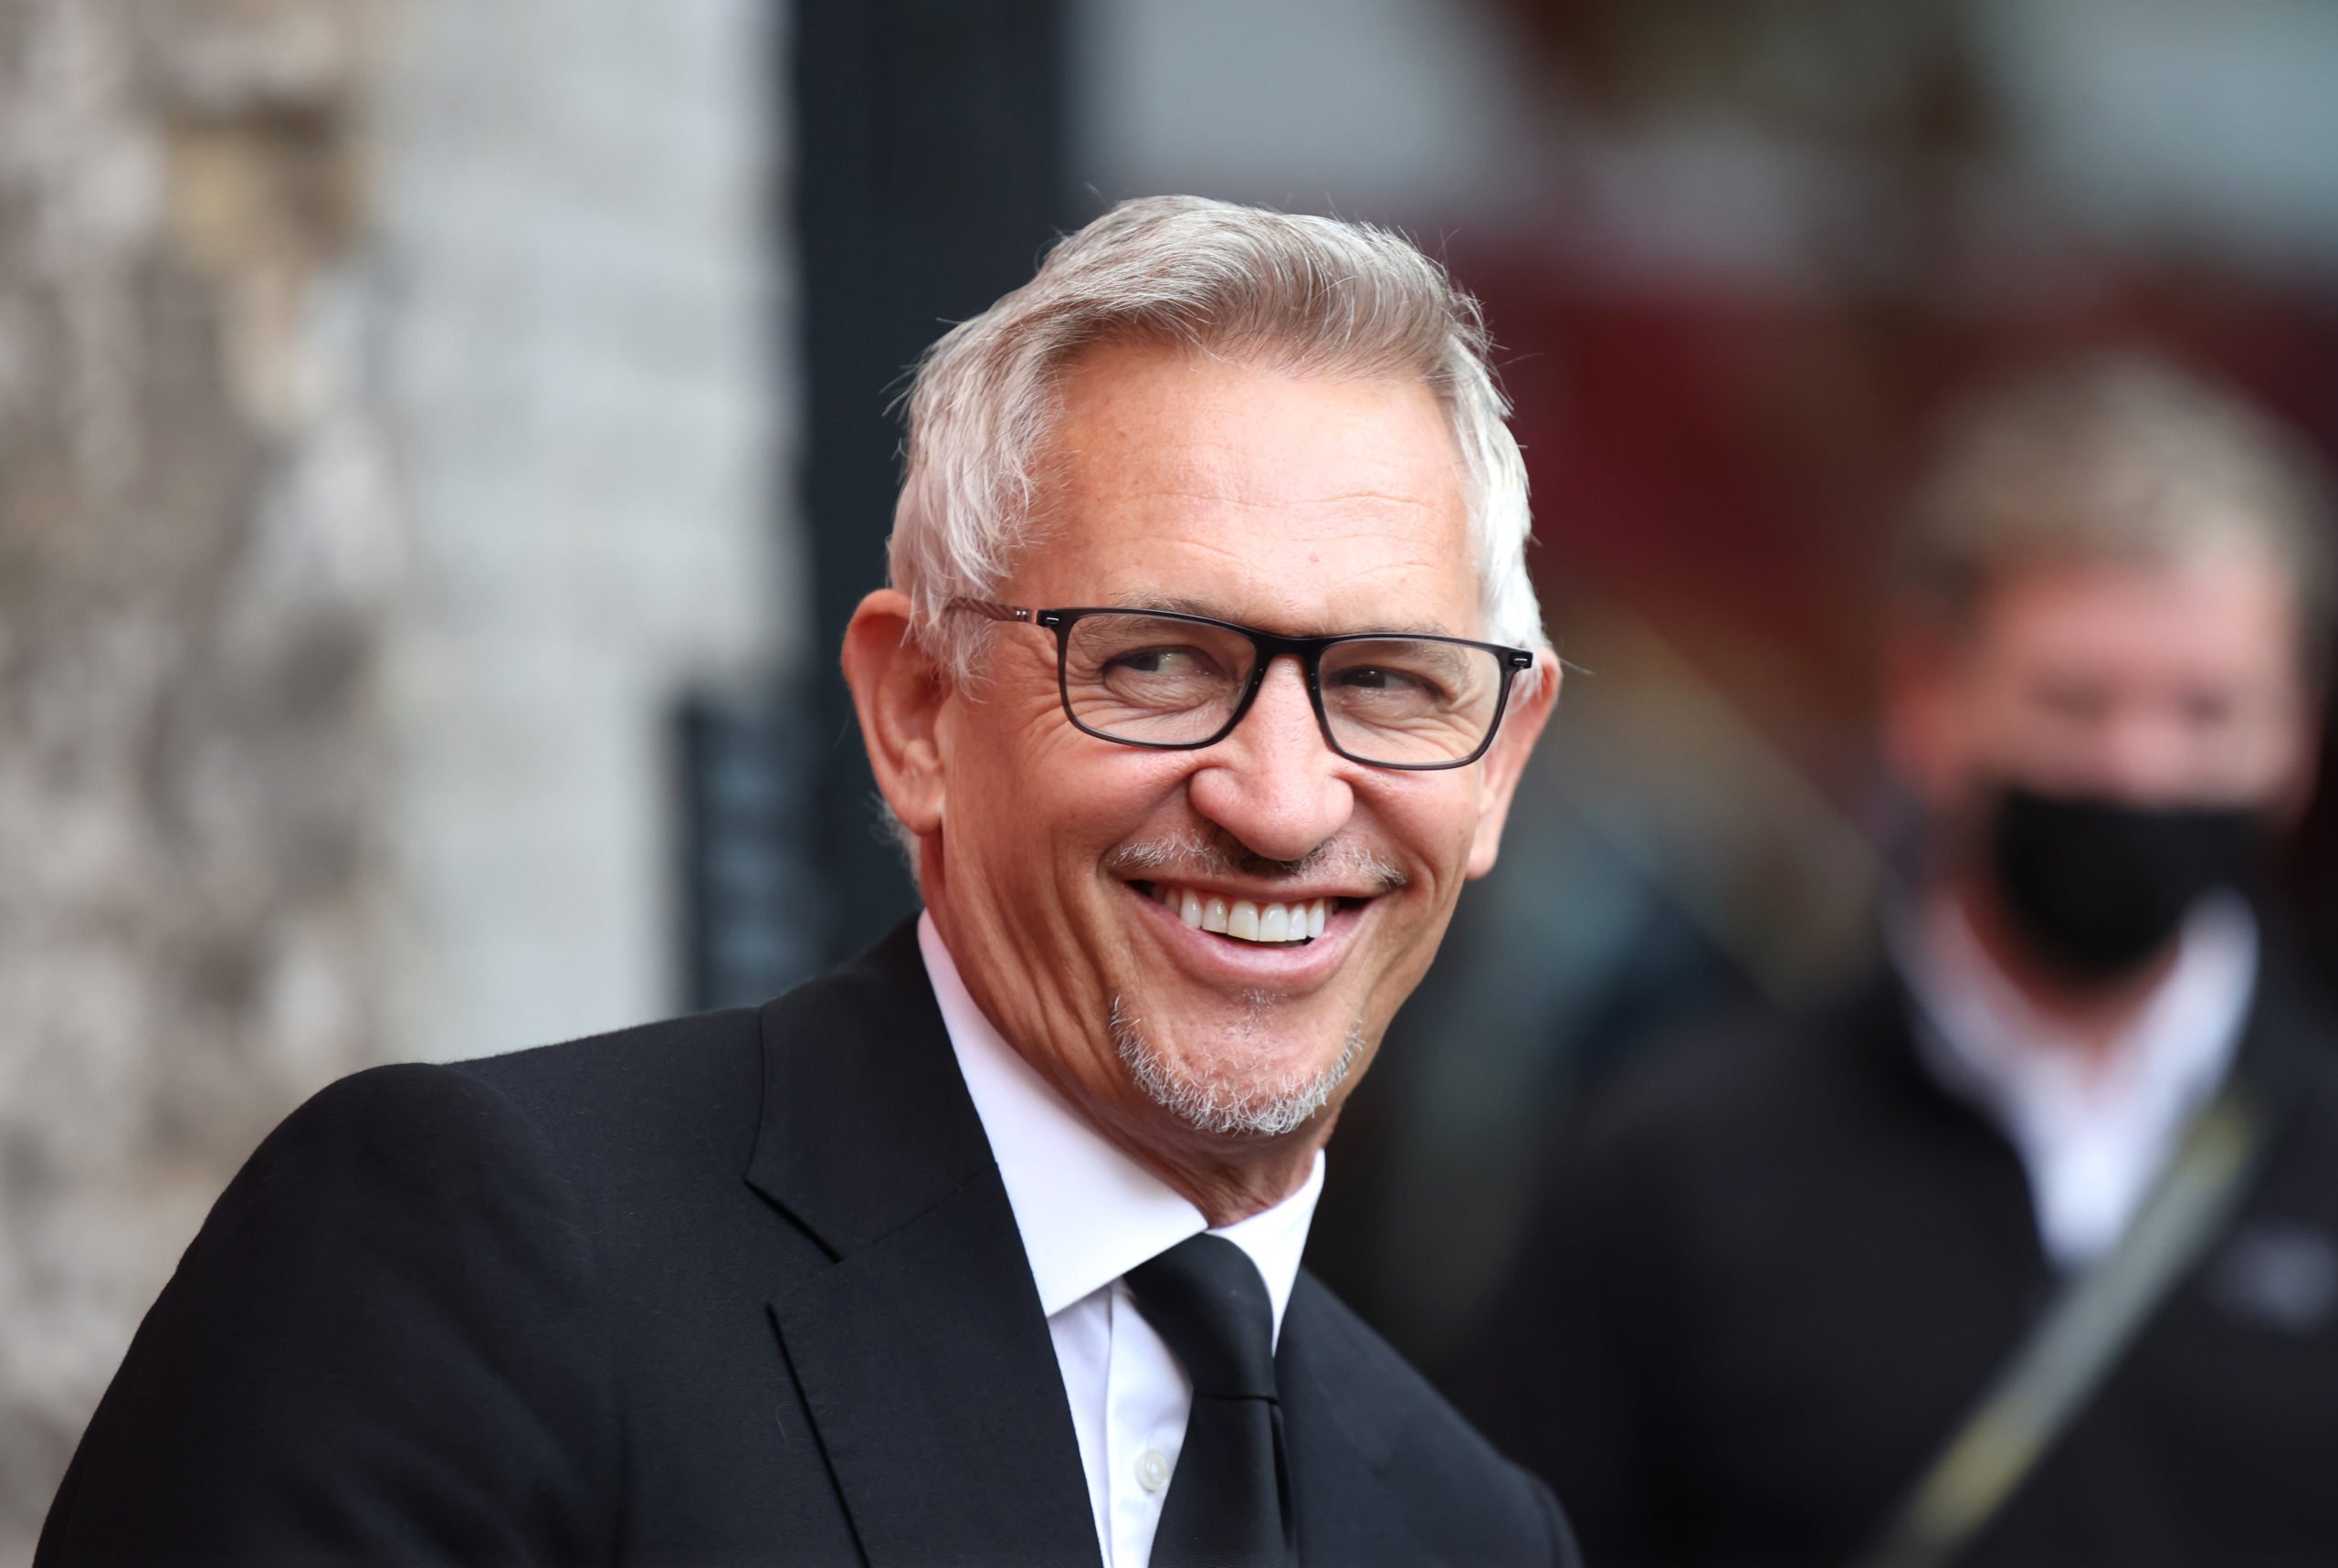 'Beyond me': Gary Lineker takes to Twitter in reaction to Yarmolenko goal and West Ham win